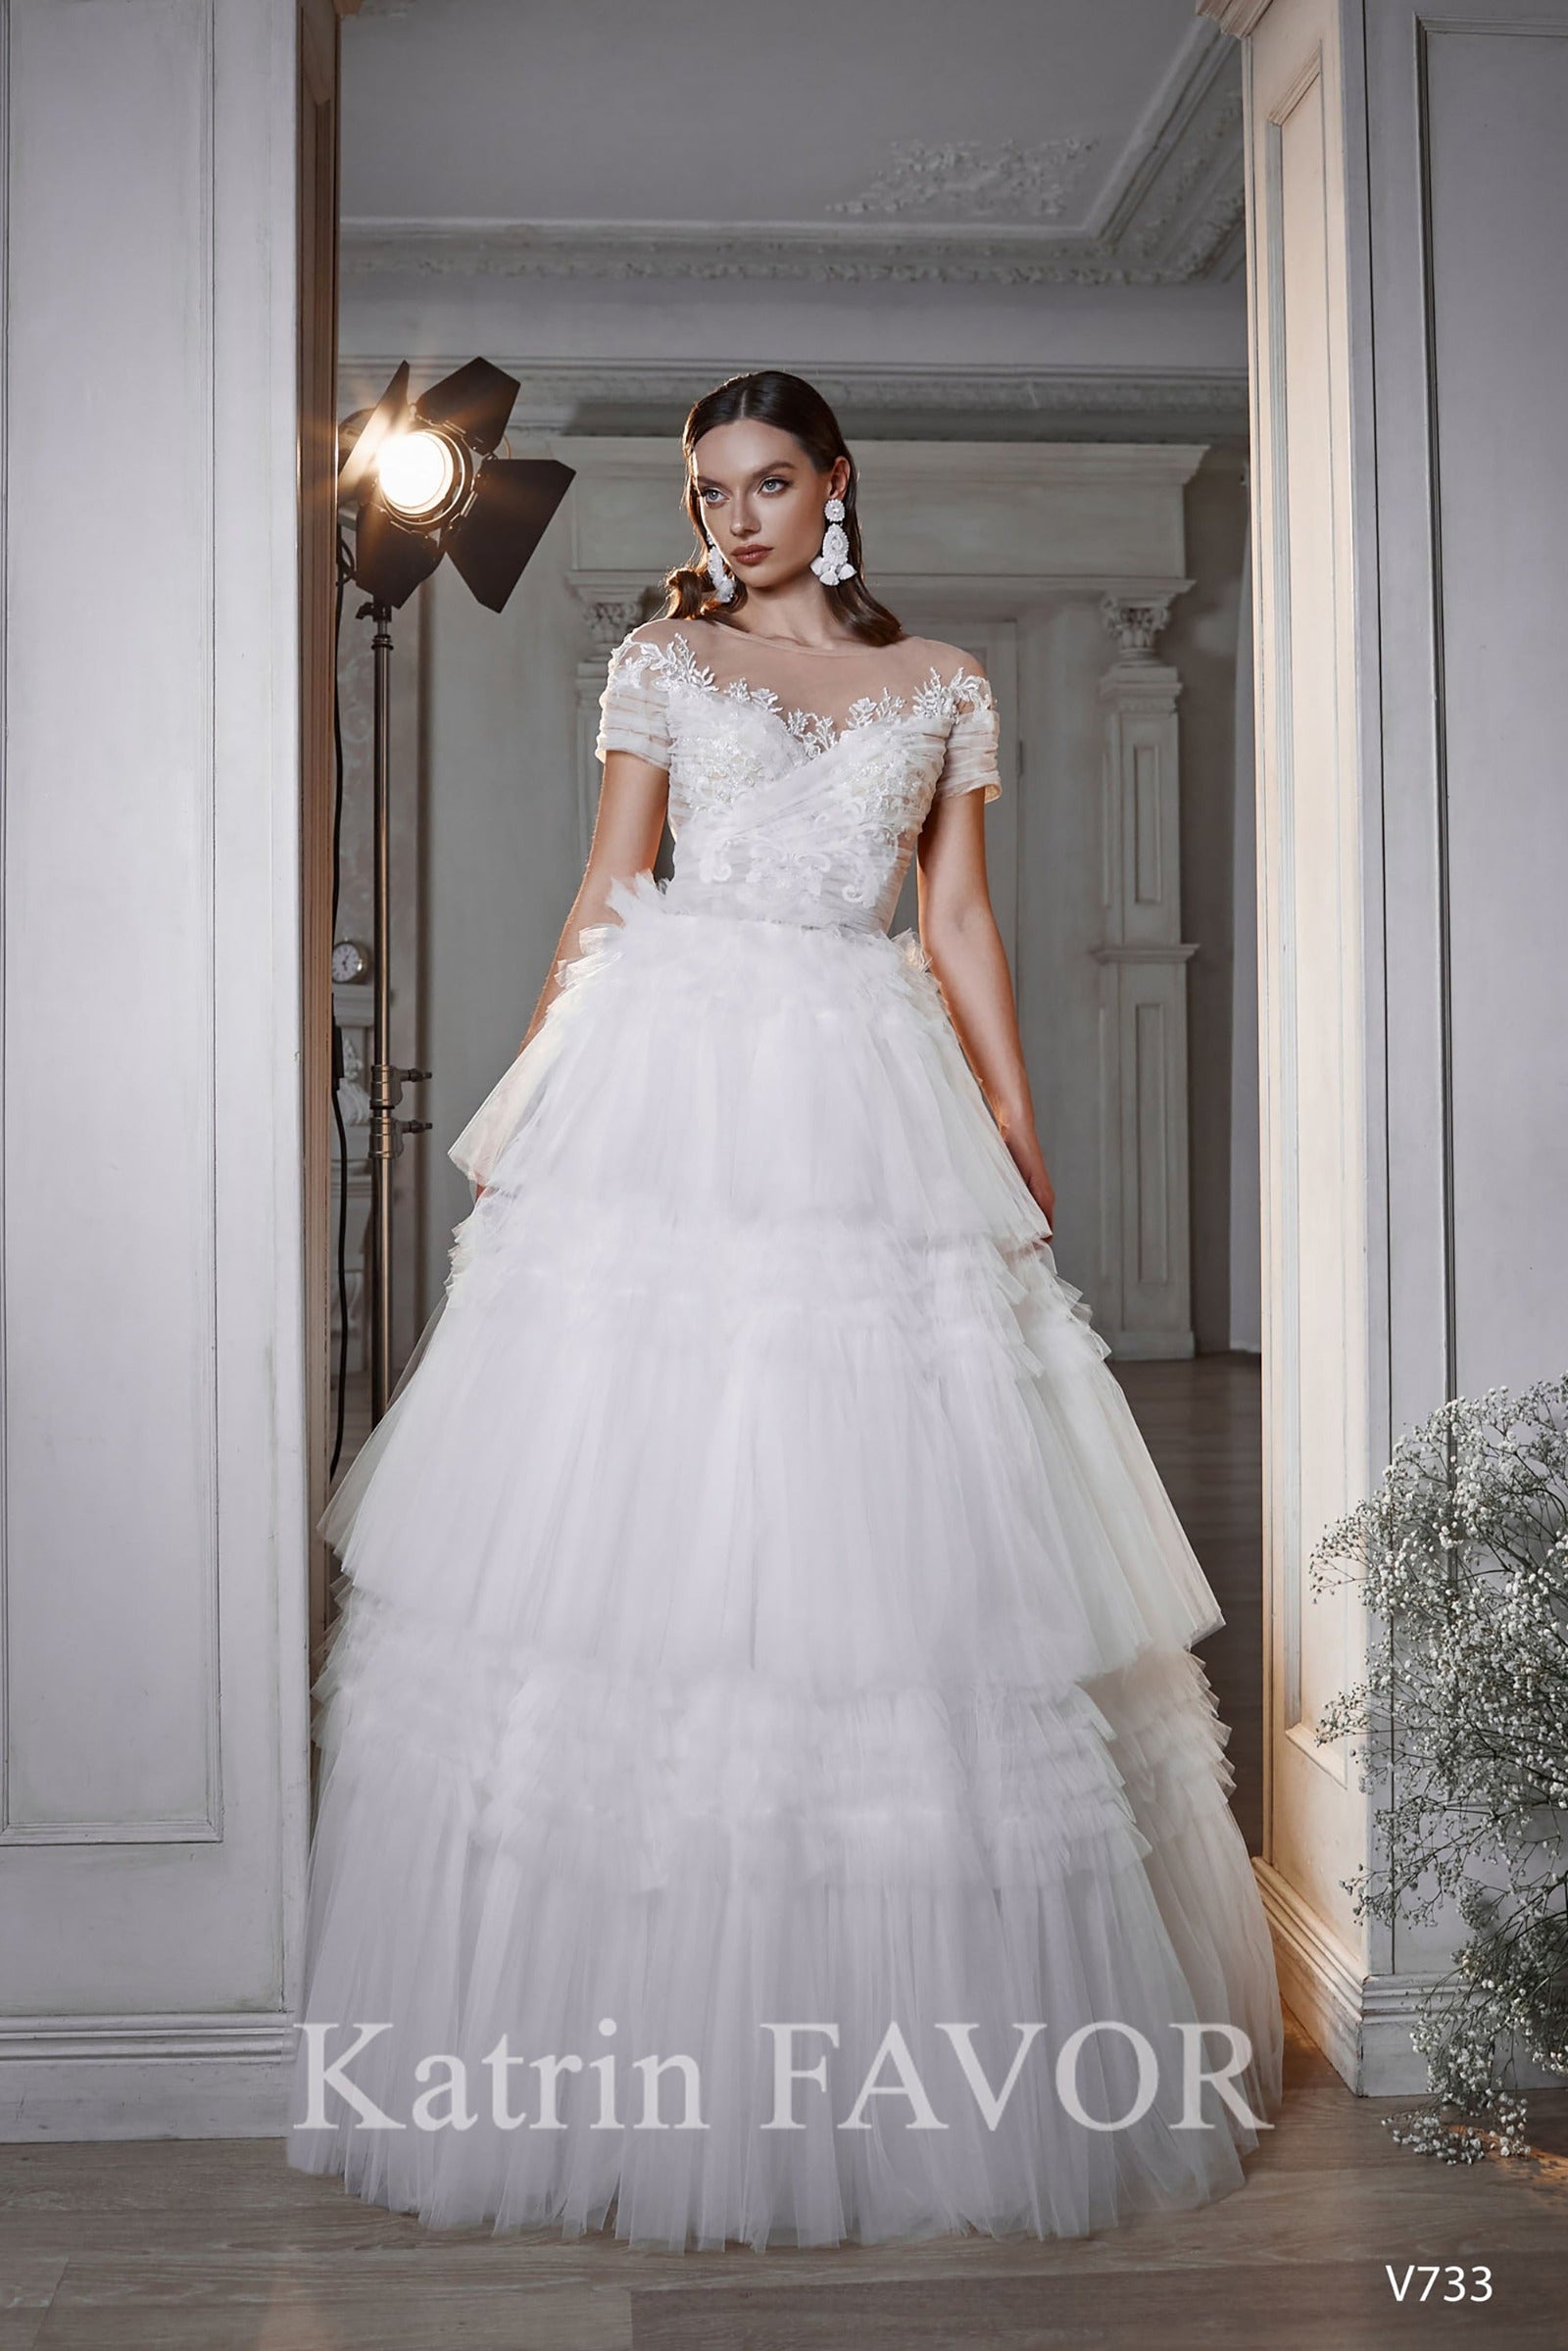 KatrinFAVORboutique-Tiered fairy wedding dress